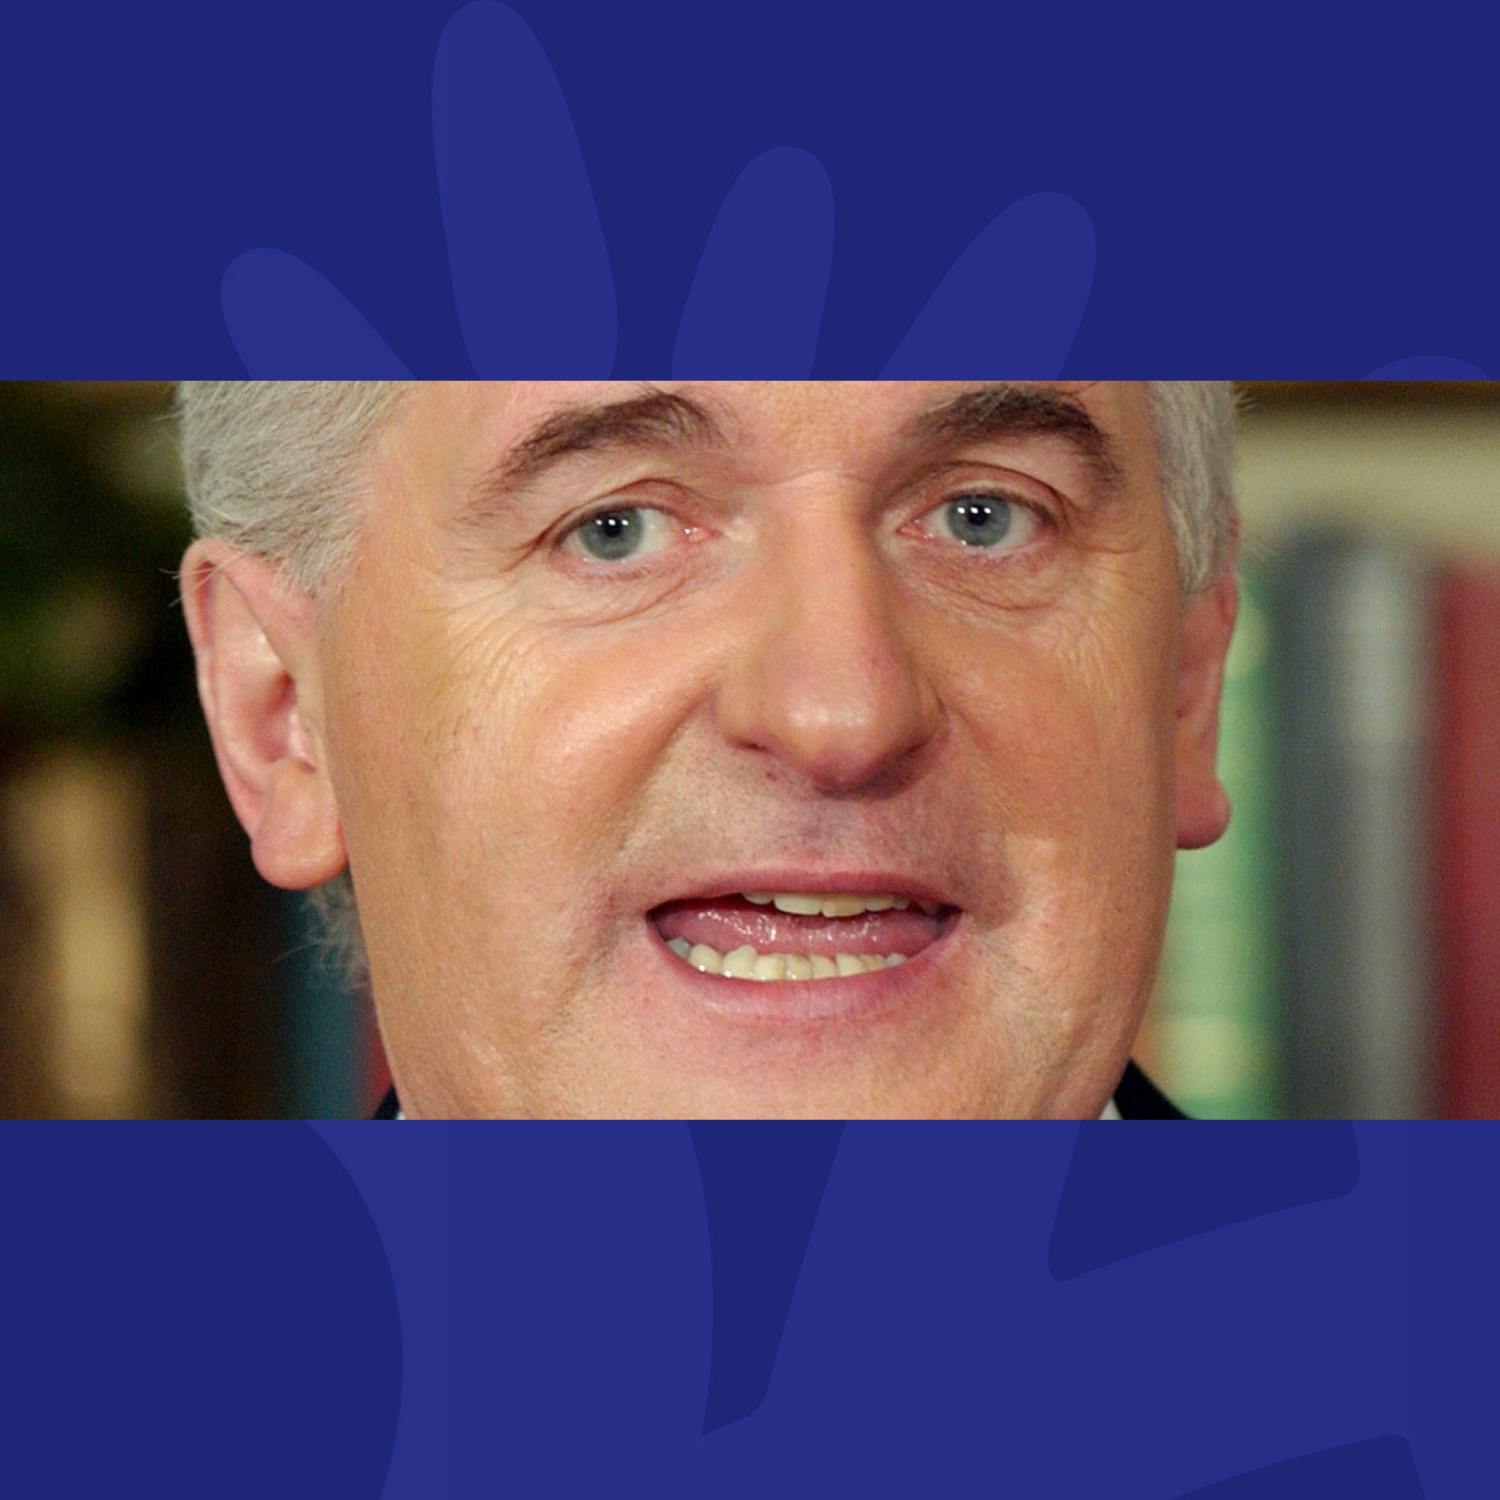 Gift Grub: Bertie Ahern Shares School Memories And His Struggles With Maths